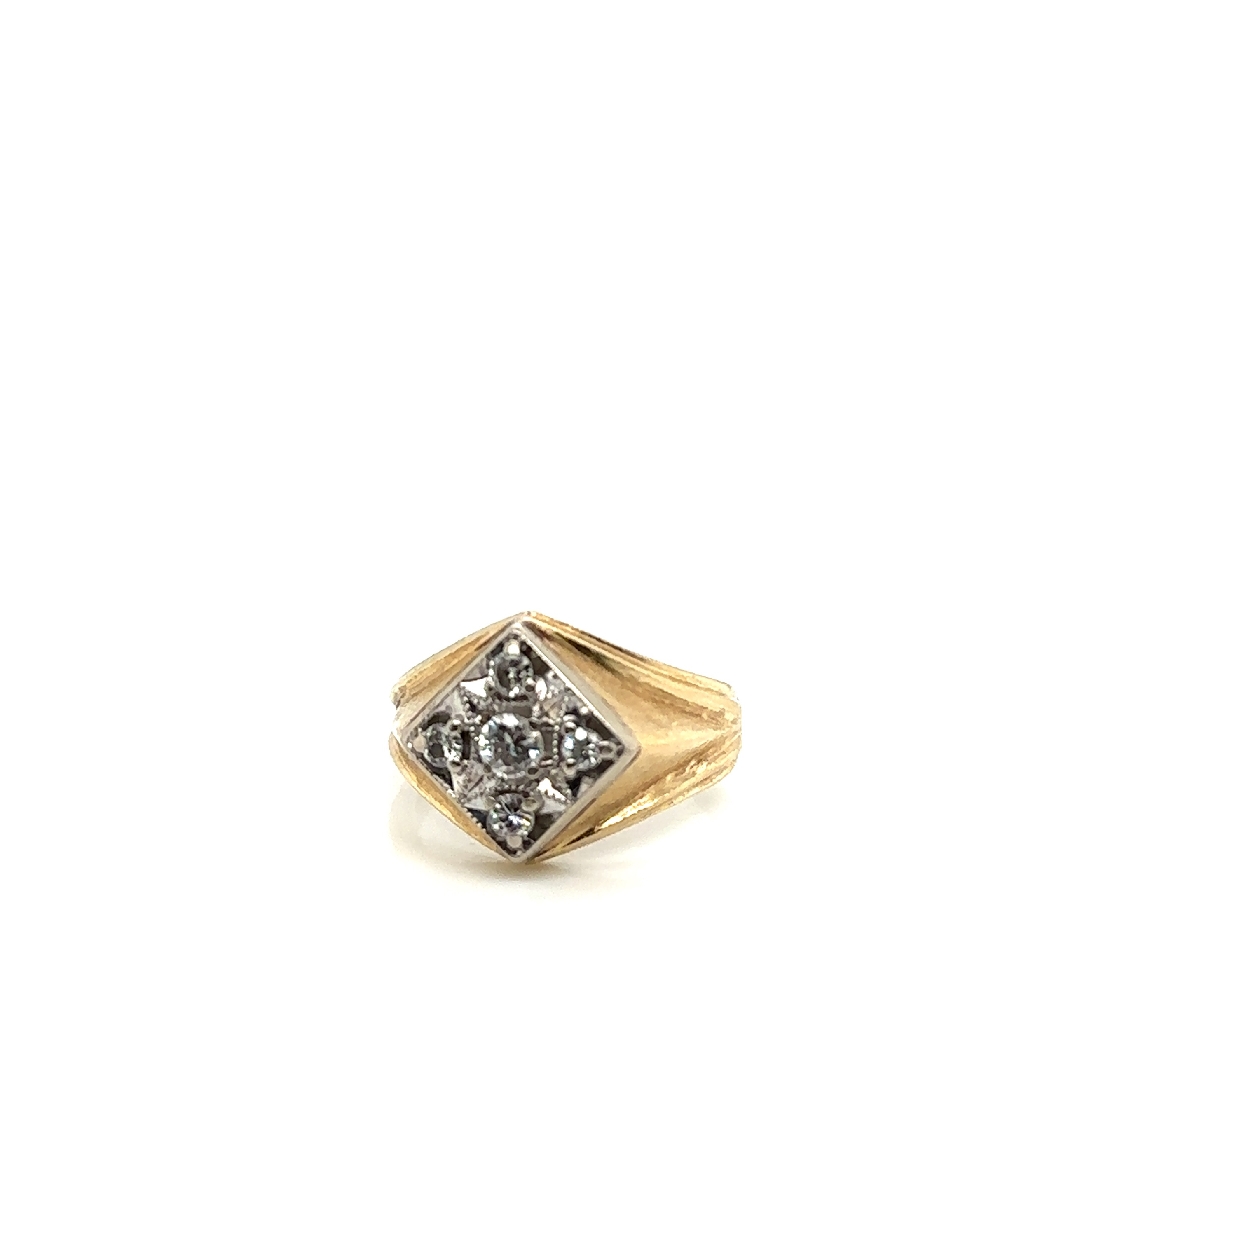 14K Yellow and White Gold Signet Style Diamond Ring With Rhombus Like Design Size 10.75